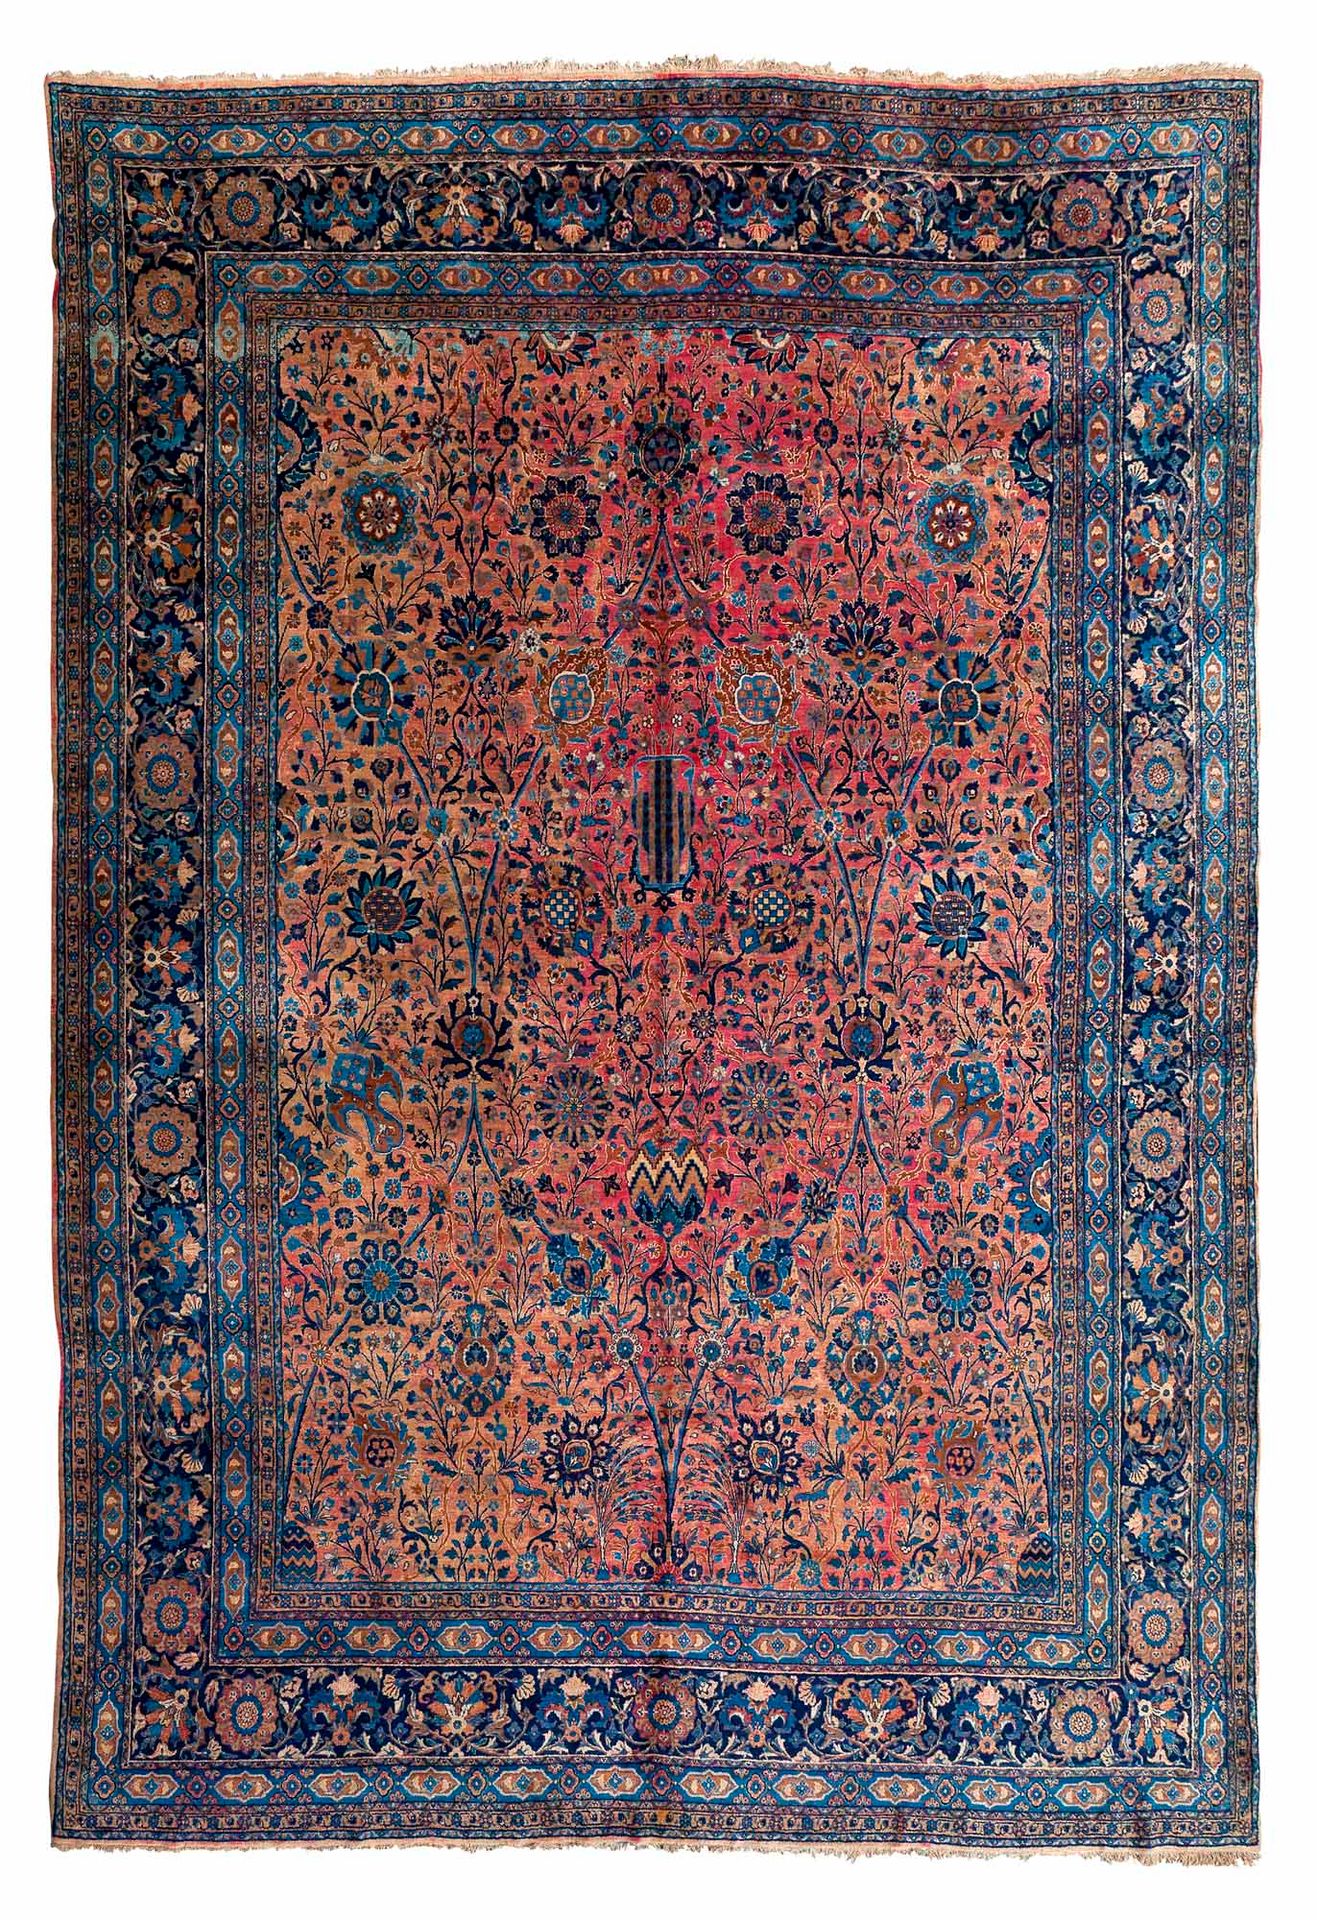 Null Important KIRMAN carpet (Persia), 1st third of the 20th century

Dimensions&hellip;